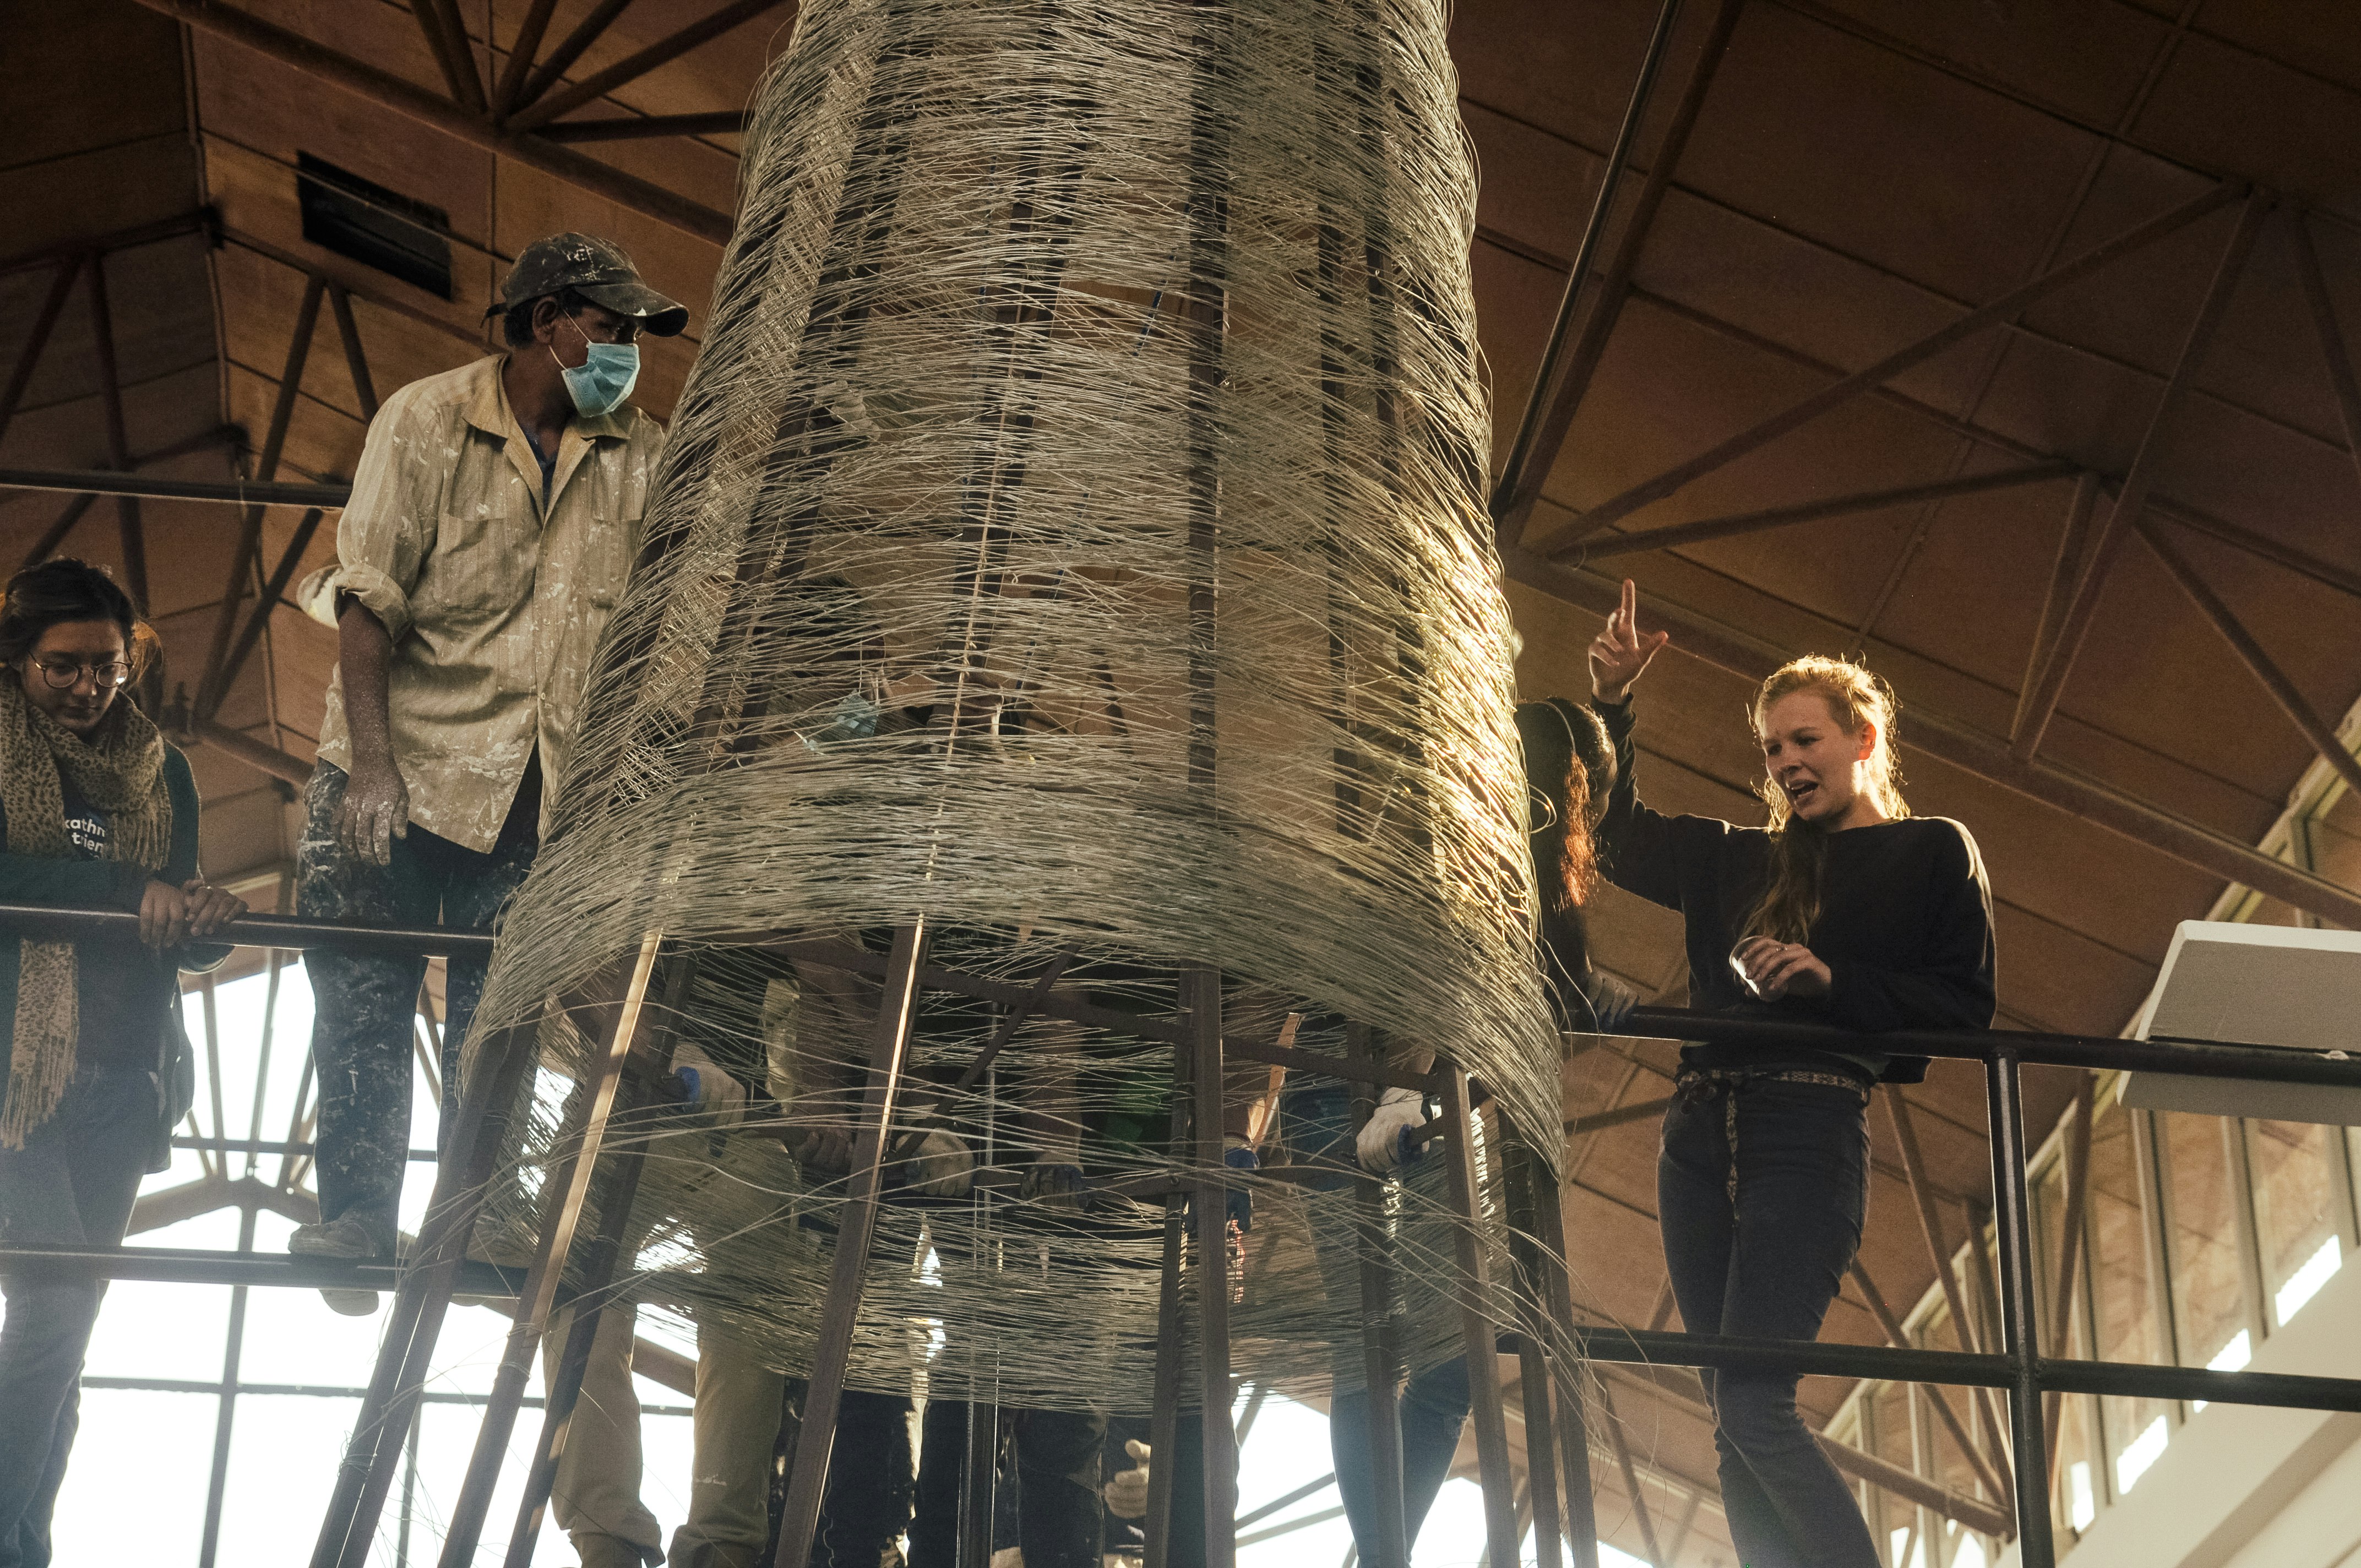 An installation team stand on a metal balcony, facing a immense cylindrical structure wrapped in metal.